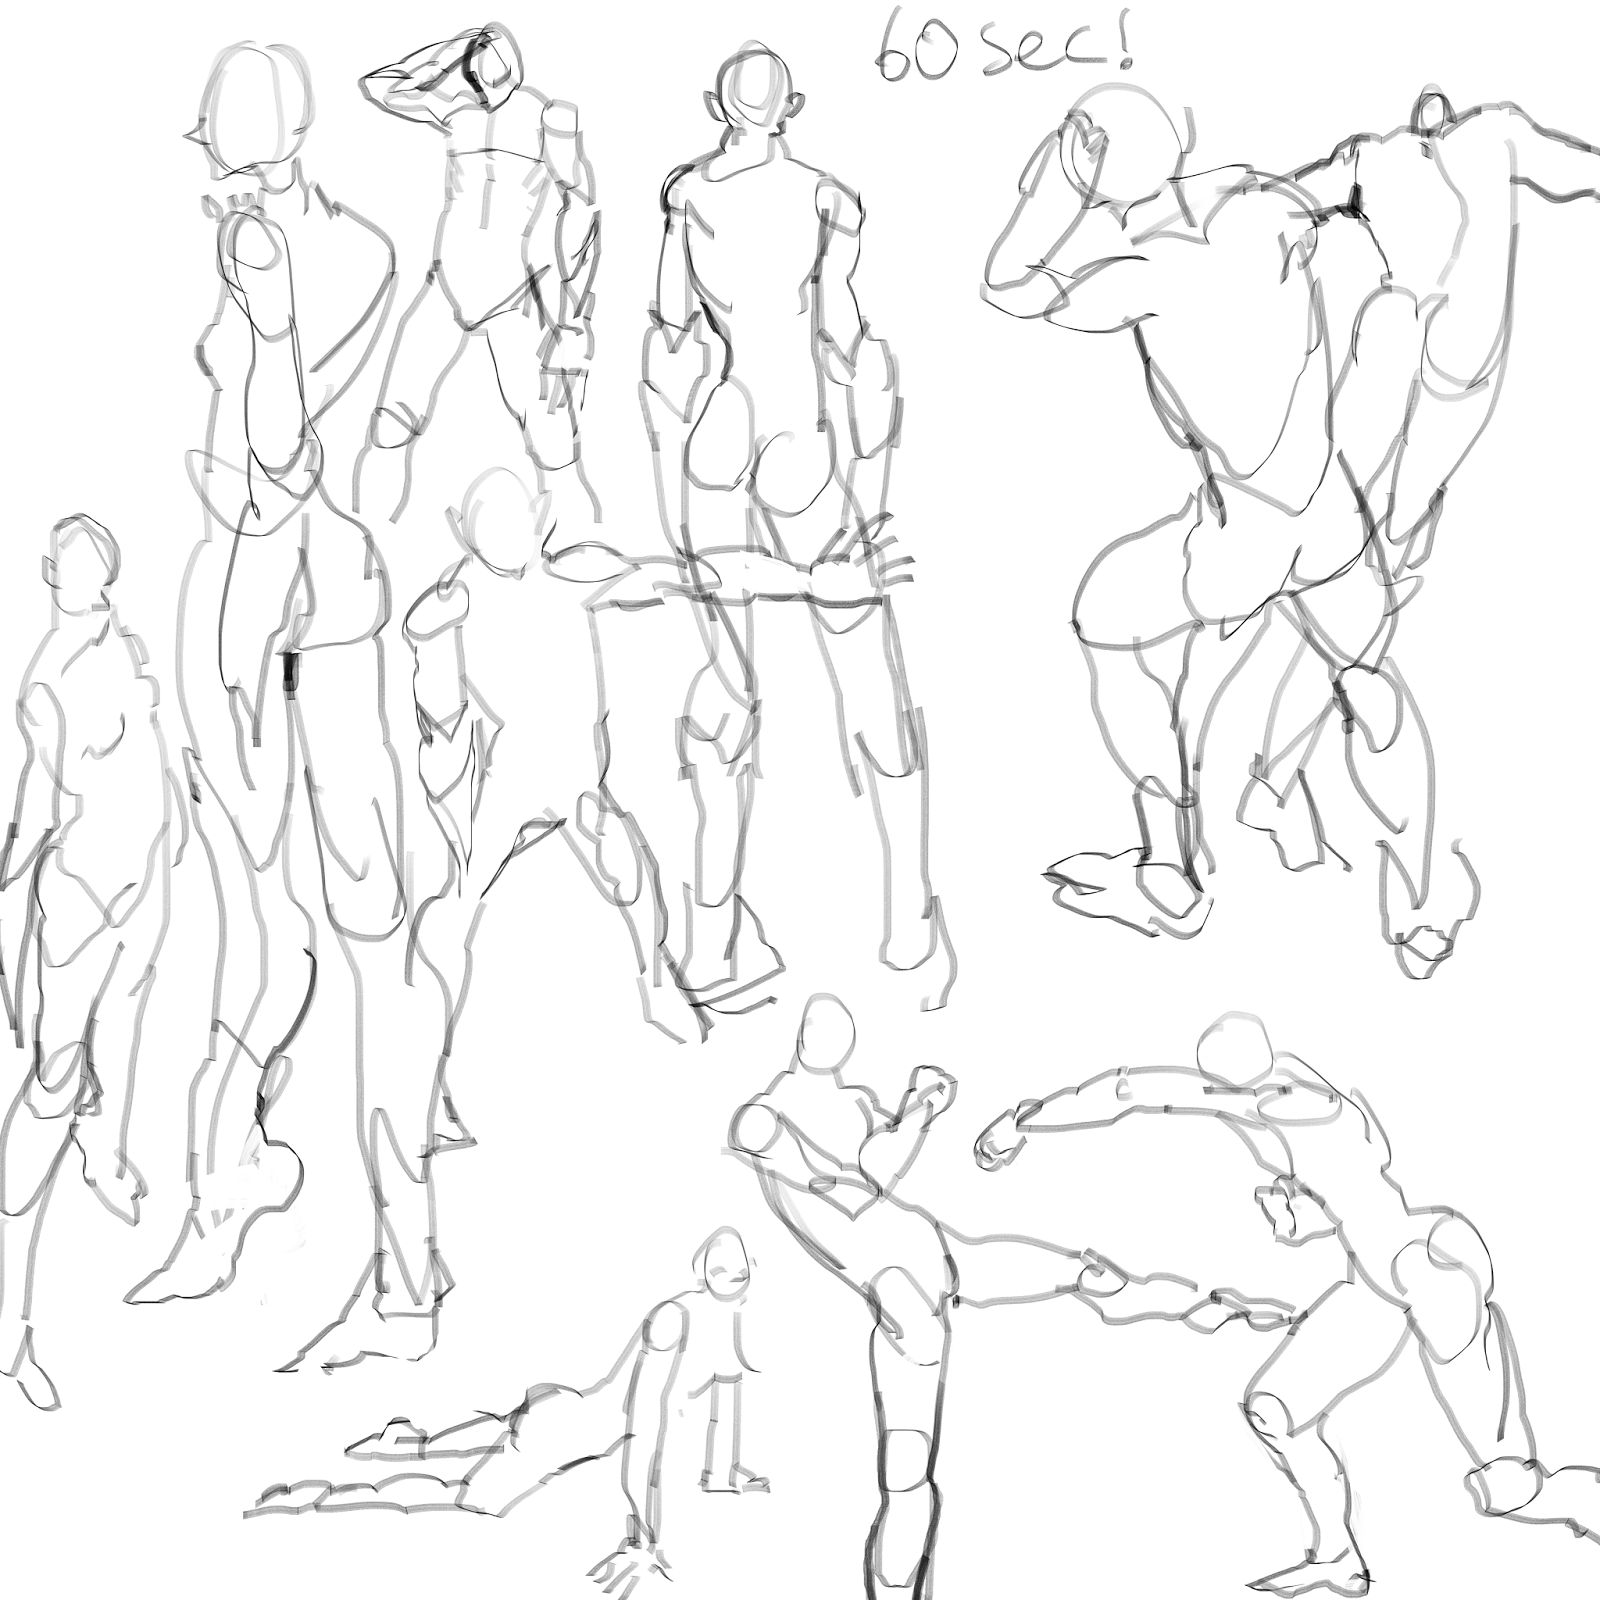 How to Draw a MALE RUNNING POSE (Version 1) - Draw it, Too!